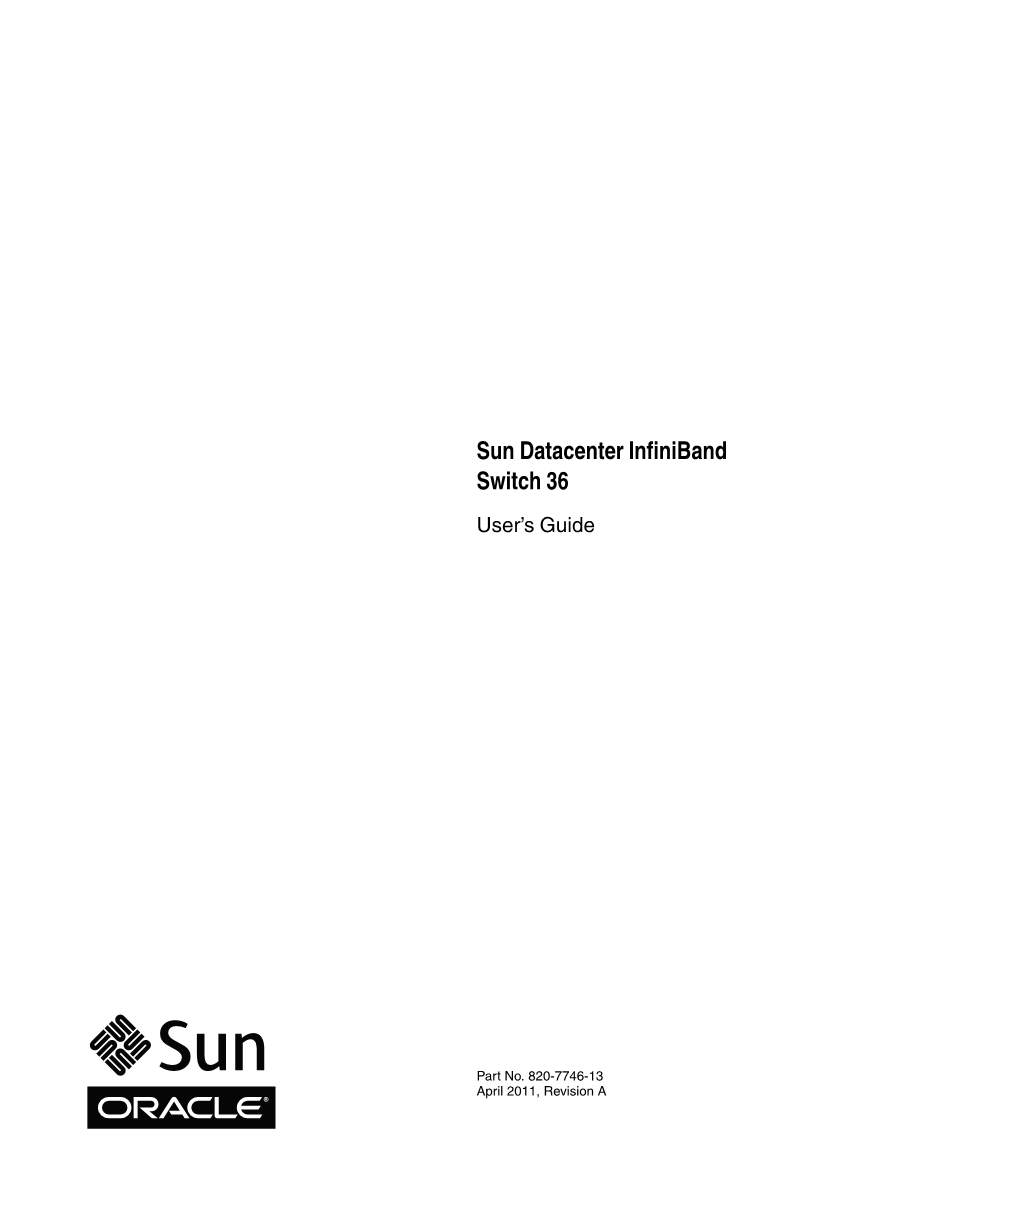 Sun Datacenter Infiniband Switch 36 User's Guide